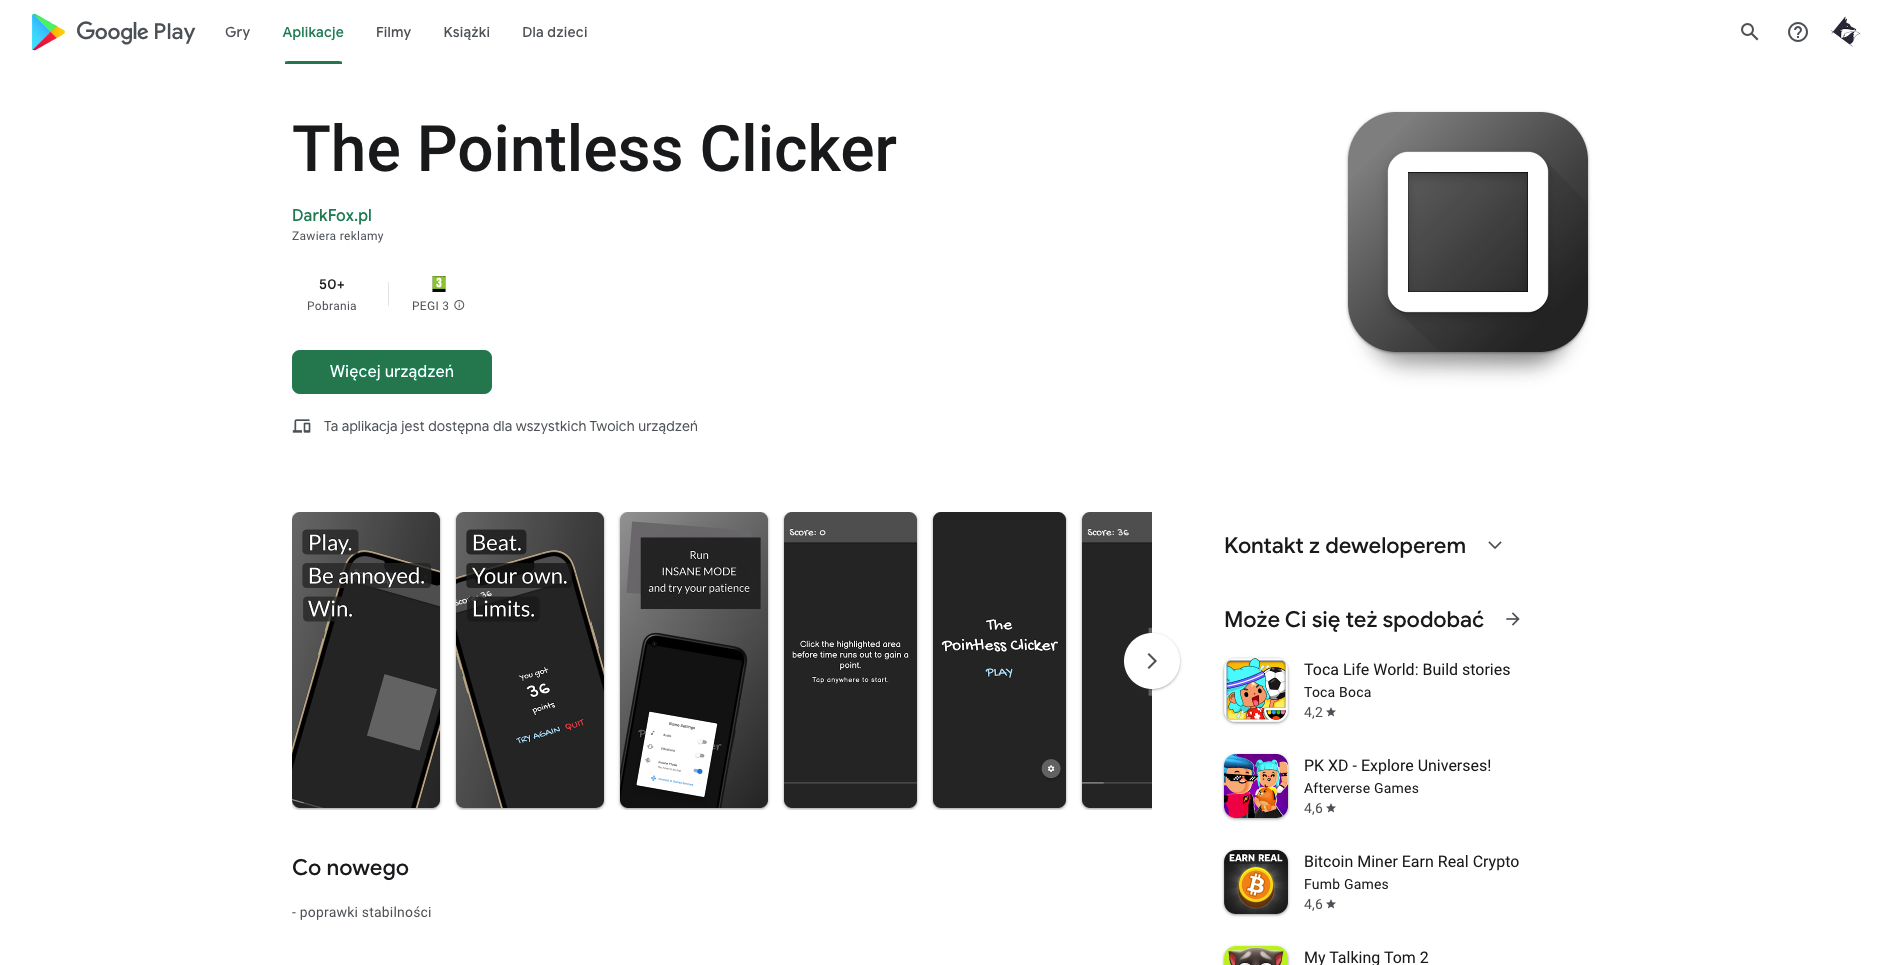 Gra na Androida - The Pointless Clicker